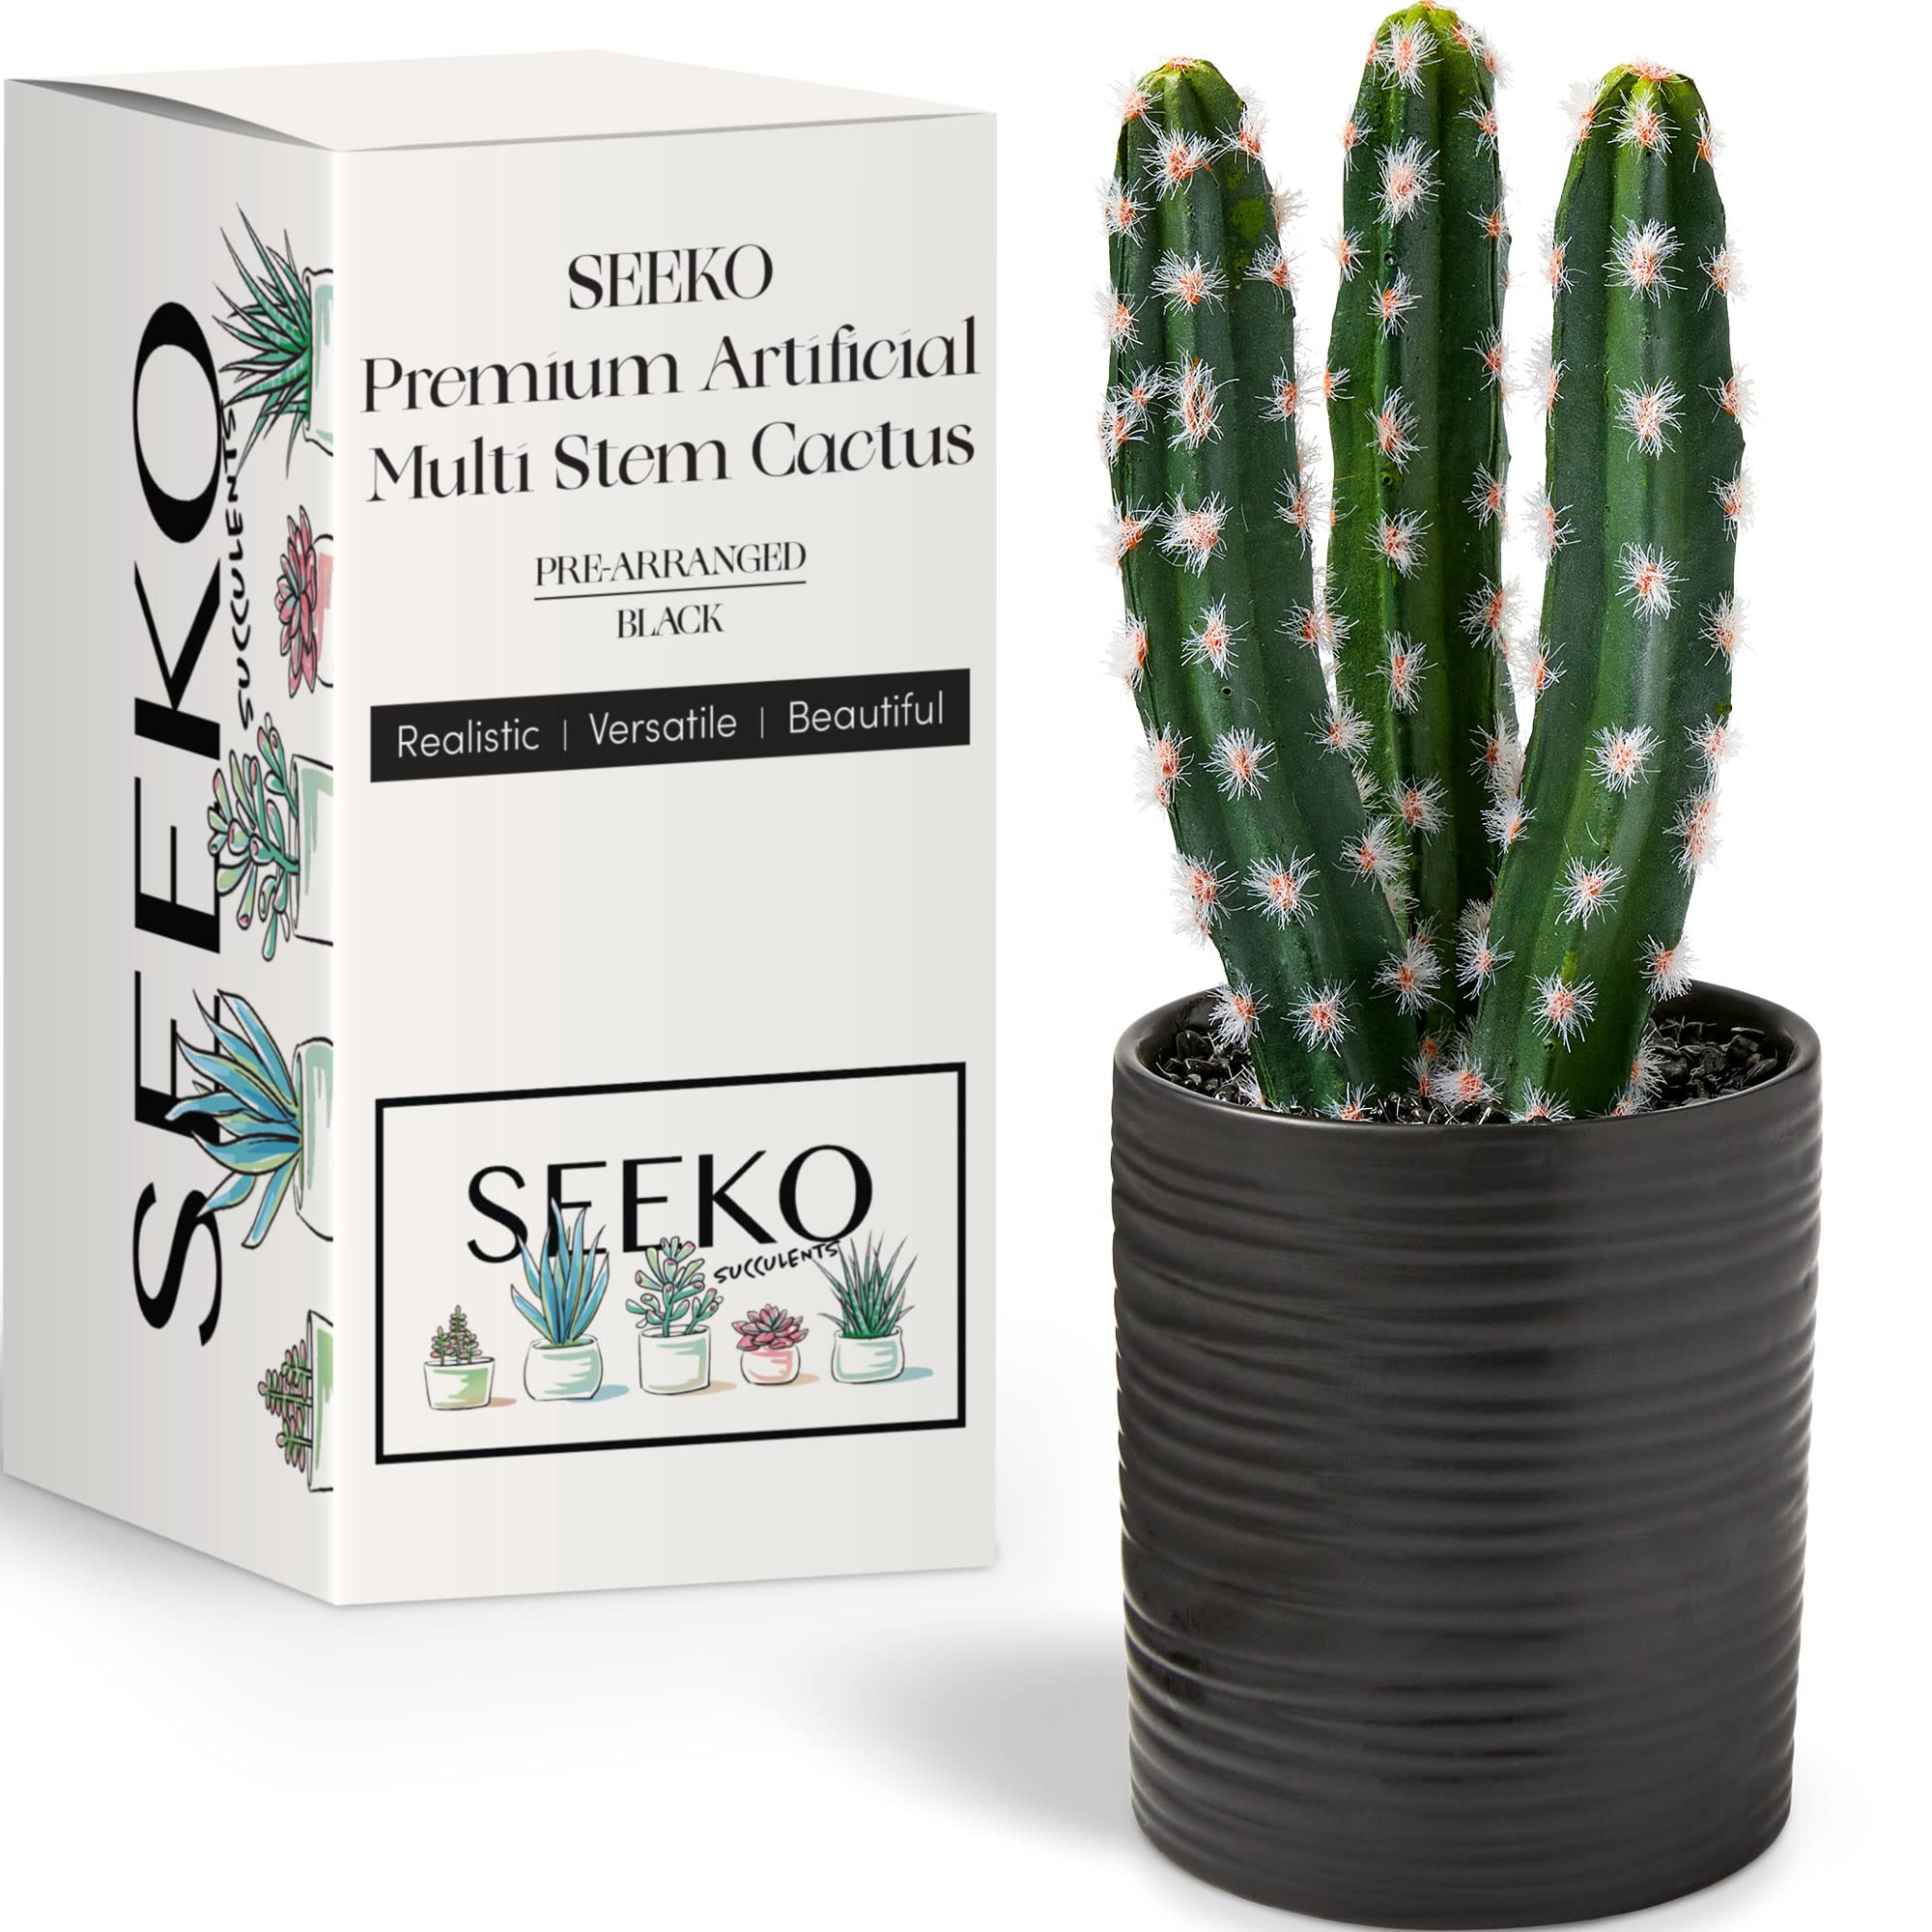 SEEKO Natural Looking Fake Cactus Plant - 11 Artificial Cactus in Ceramic  Pot for Home Decor - Small Fake Plants & Faux Succulents Cacti for